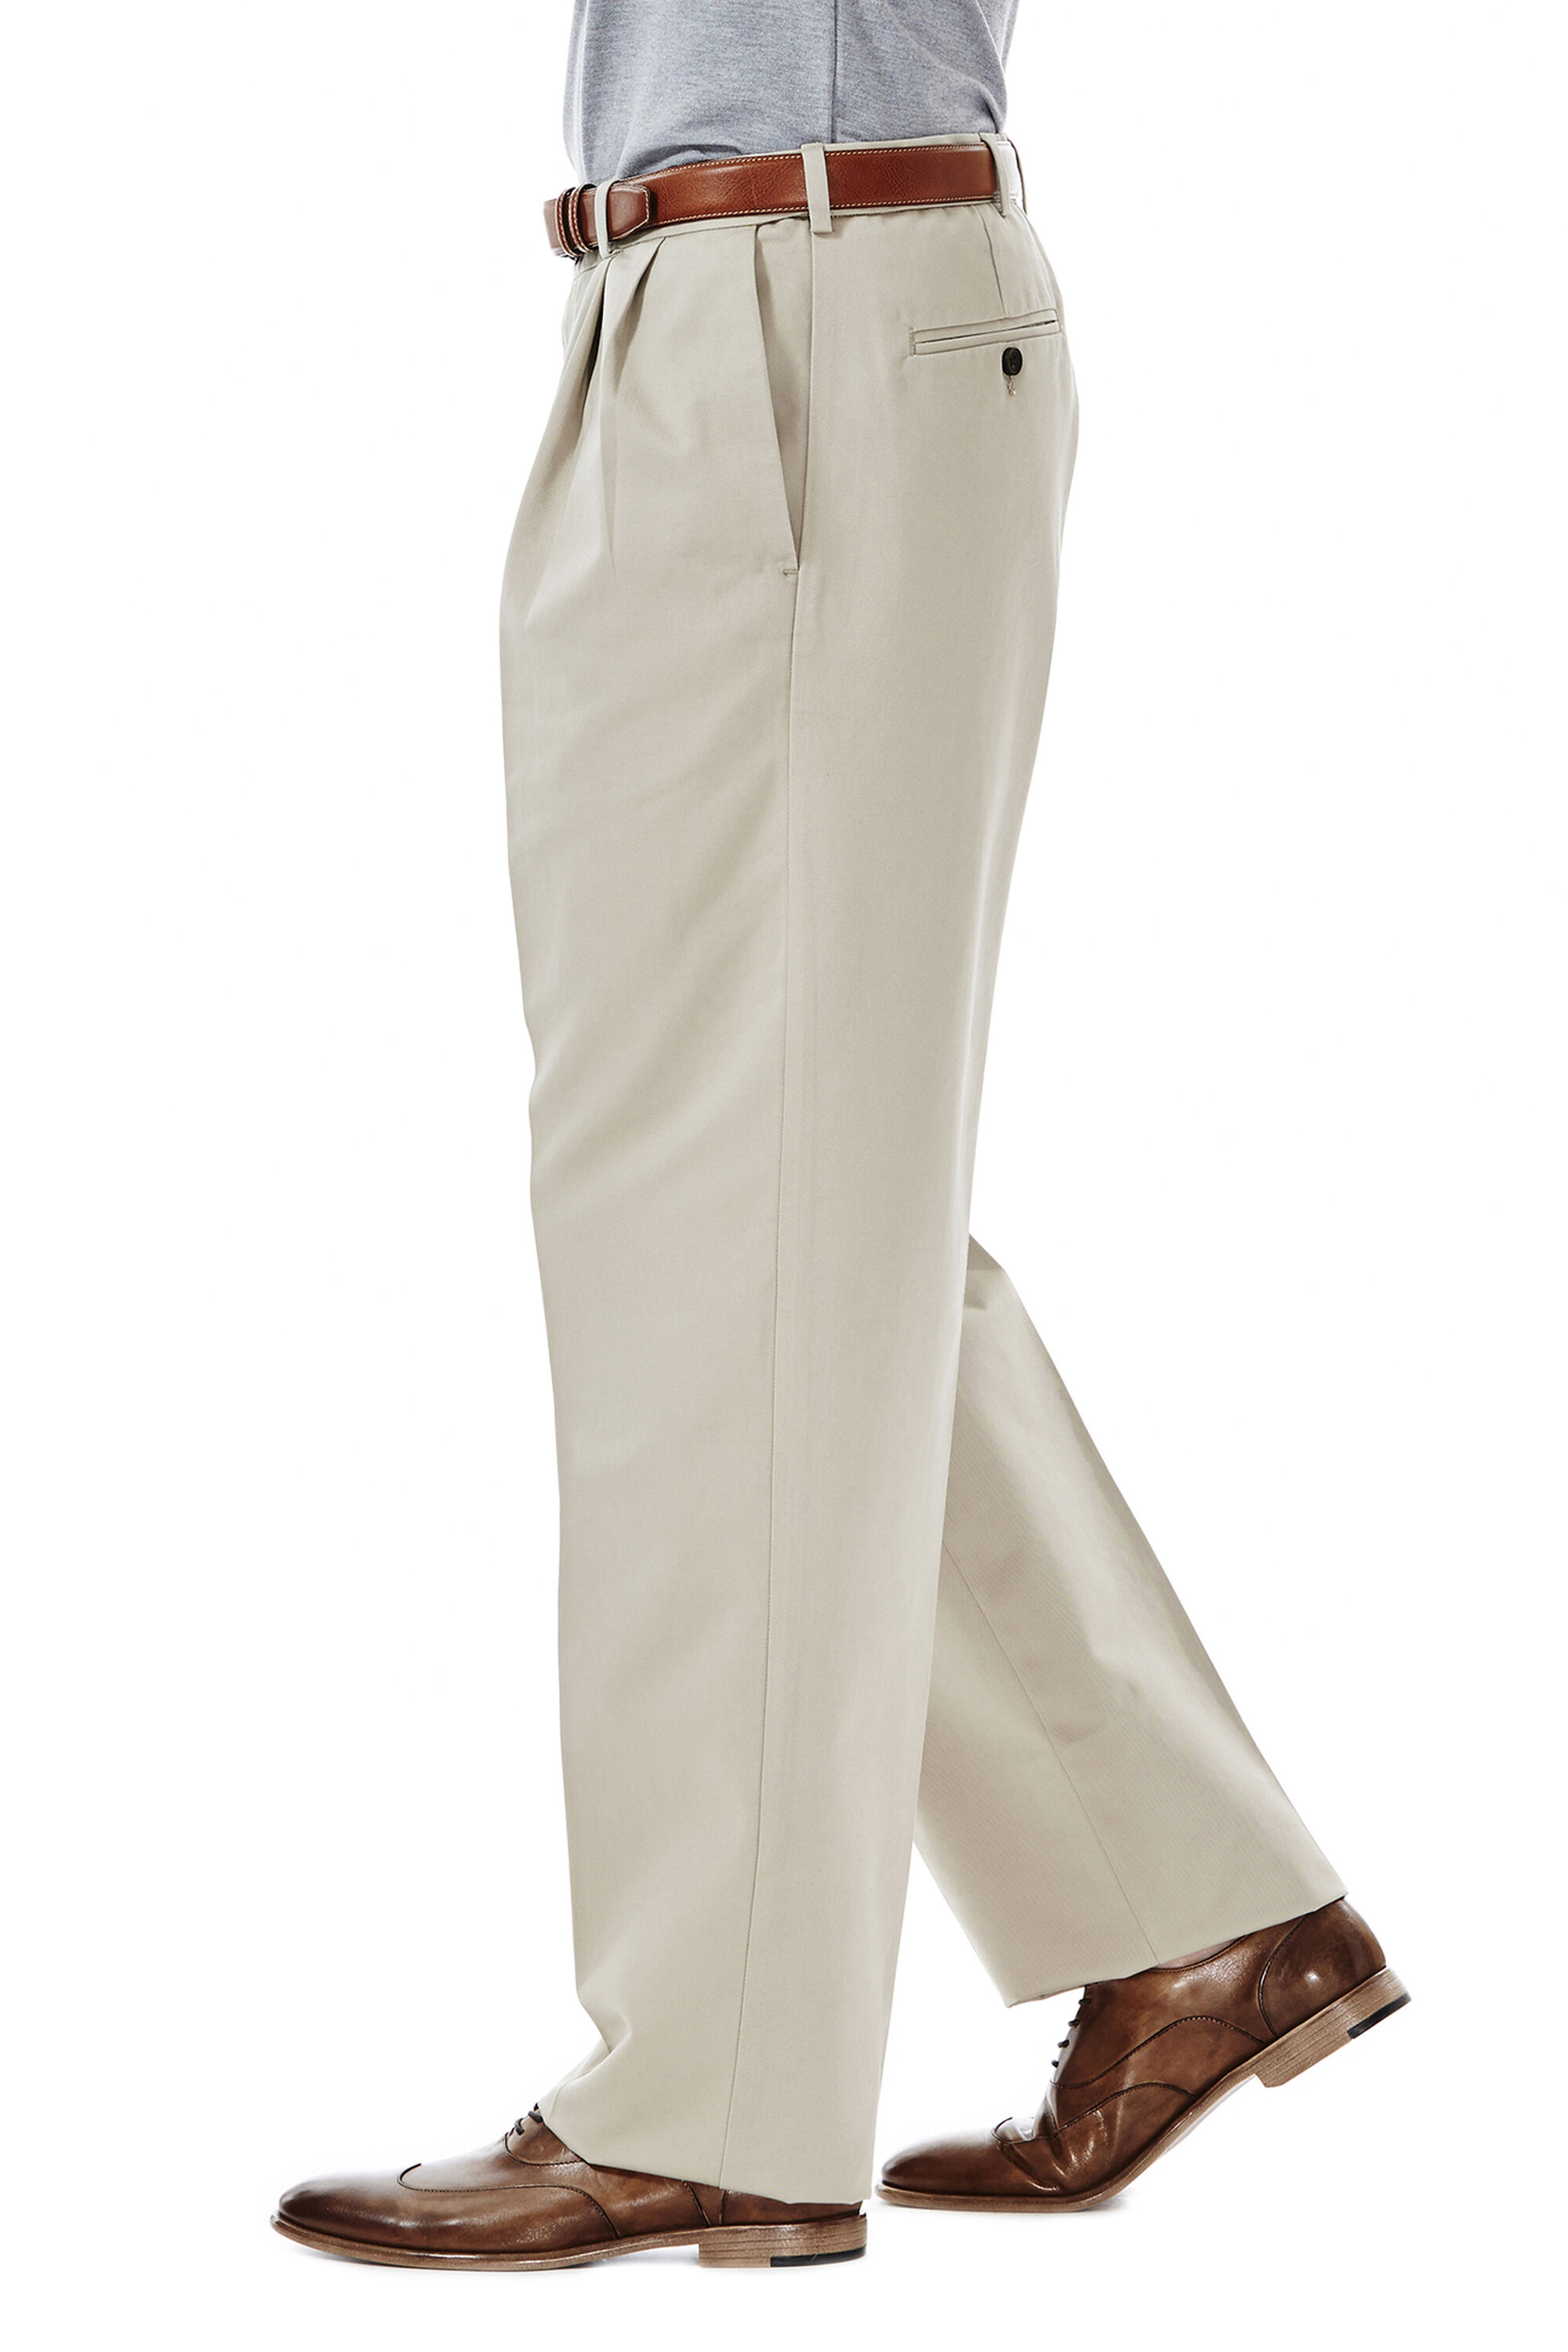 Work to Weekend Khaki | Classic Fit, Pleated, No Iron | Haggar.com